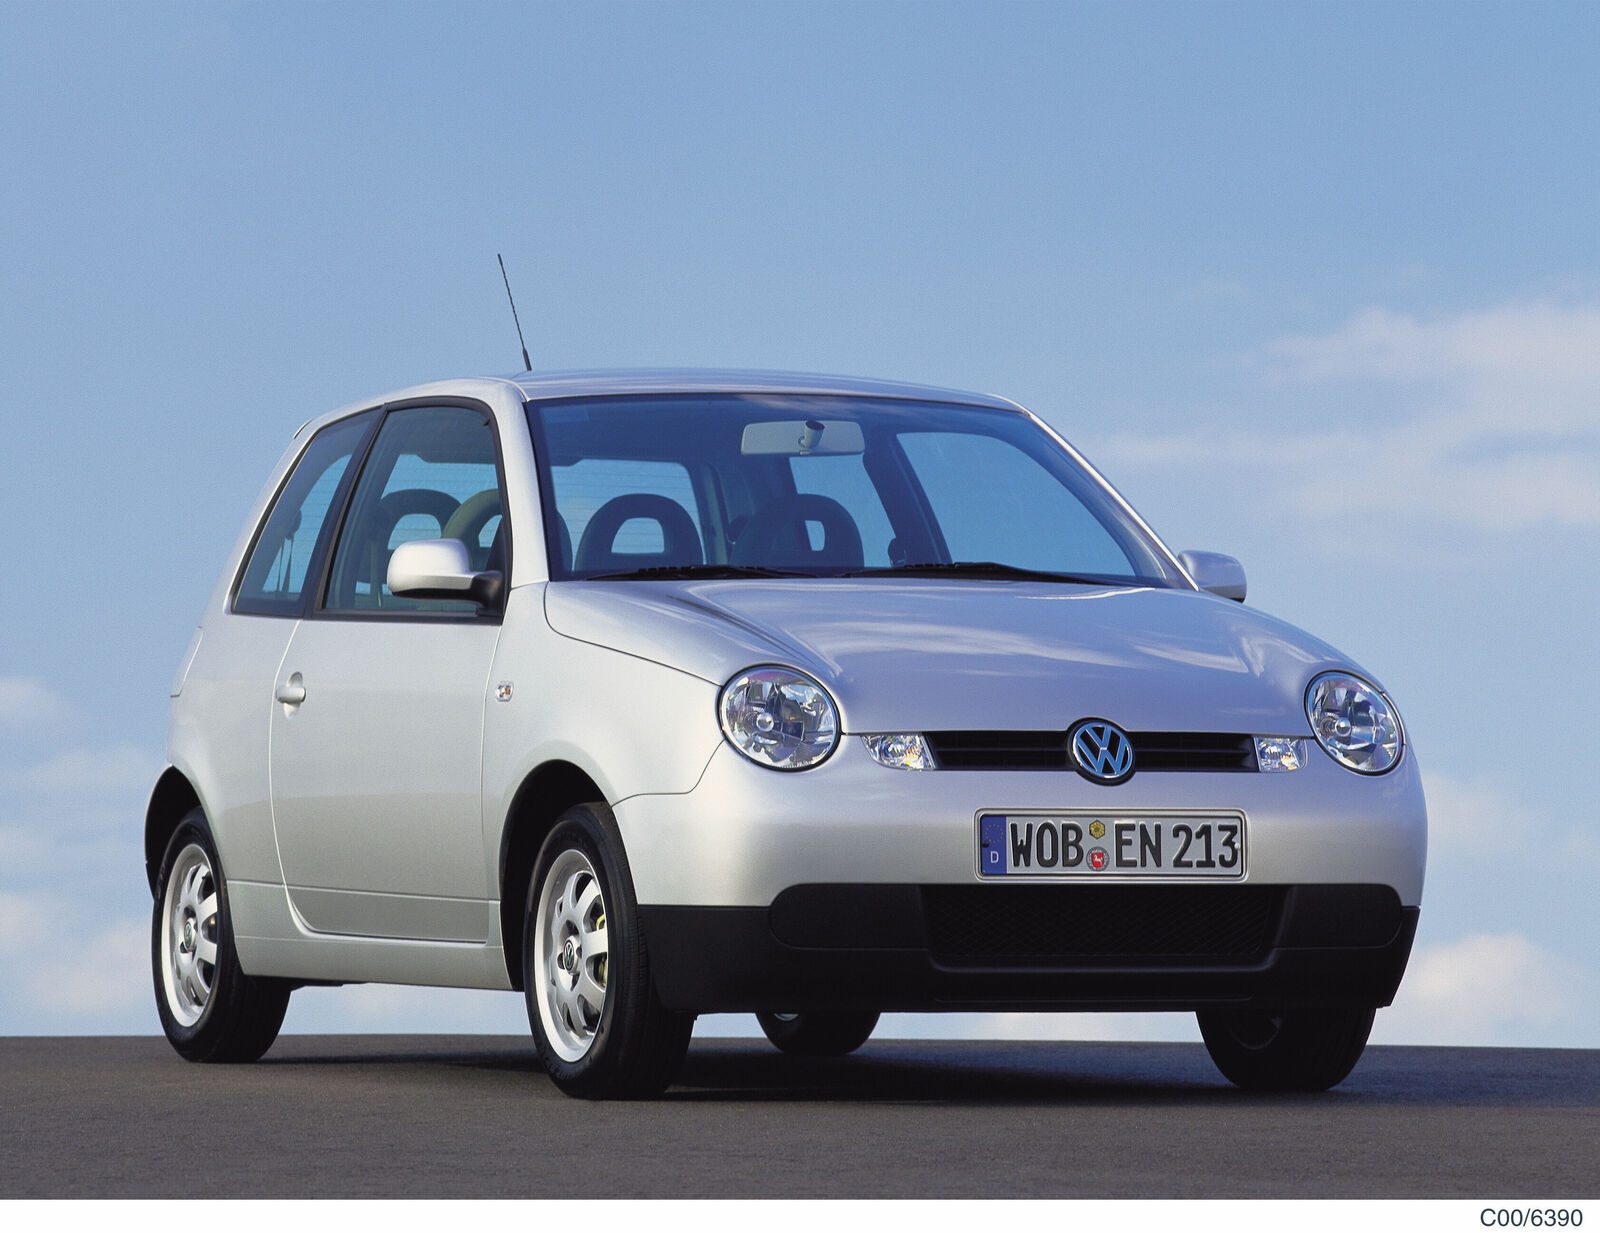 Used Volkswagen Lupo Hatchback (1999 - 2005) Review